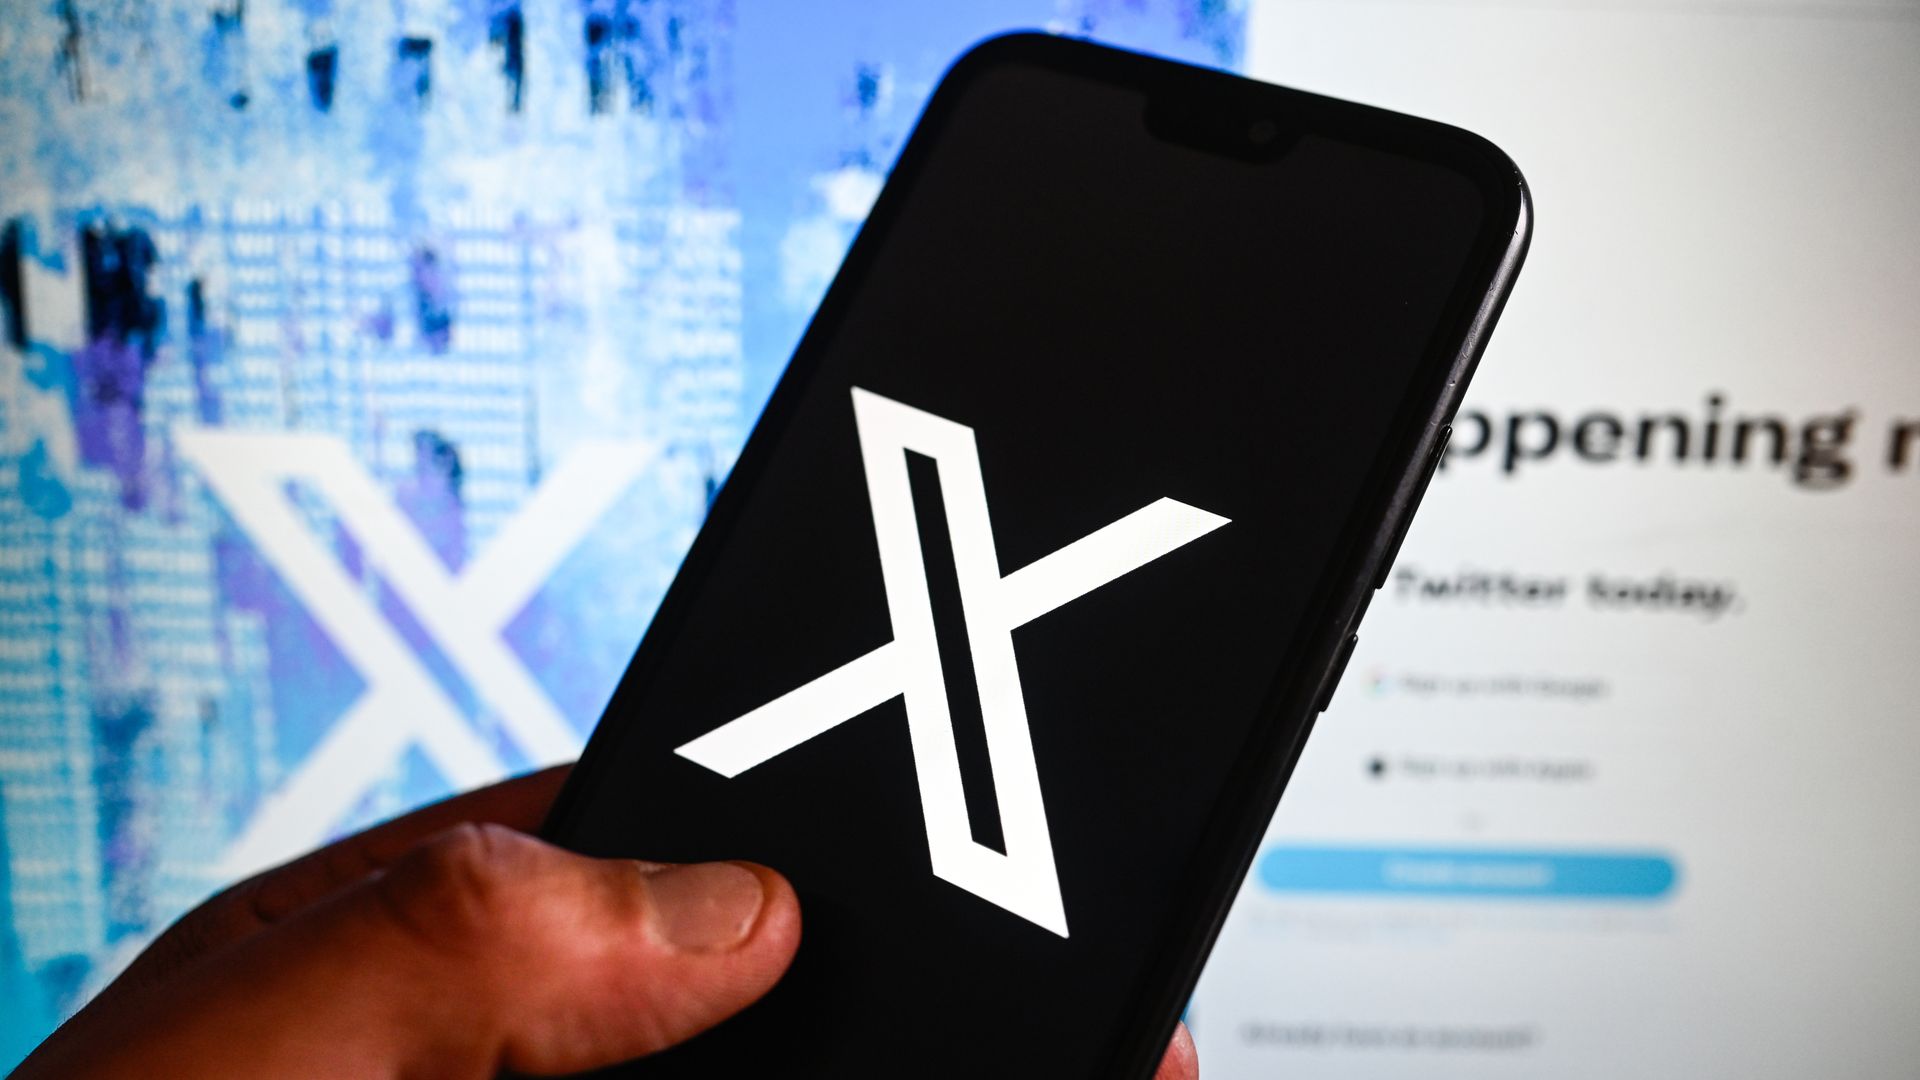 (X) is displayed on a smartphone 